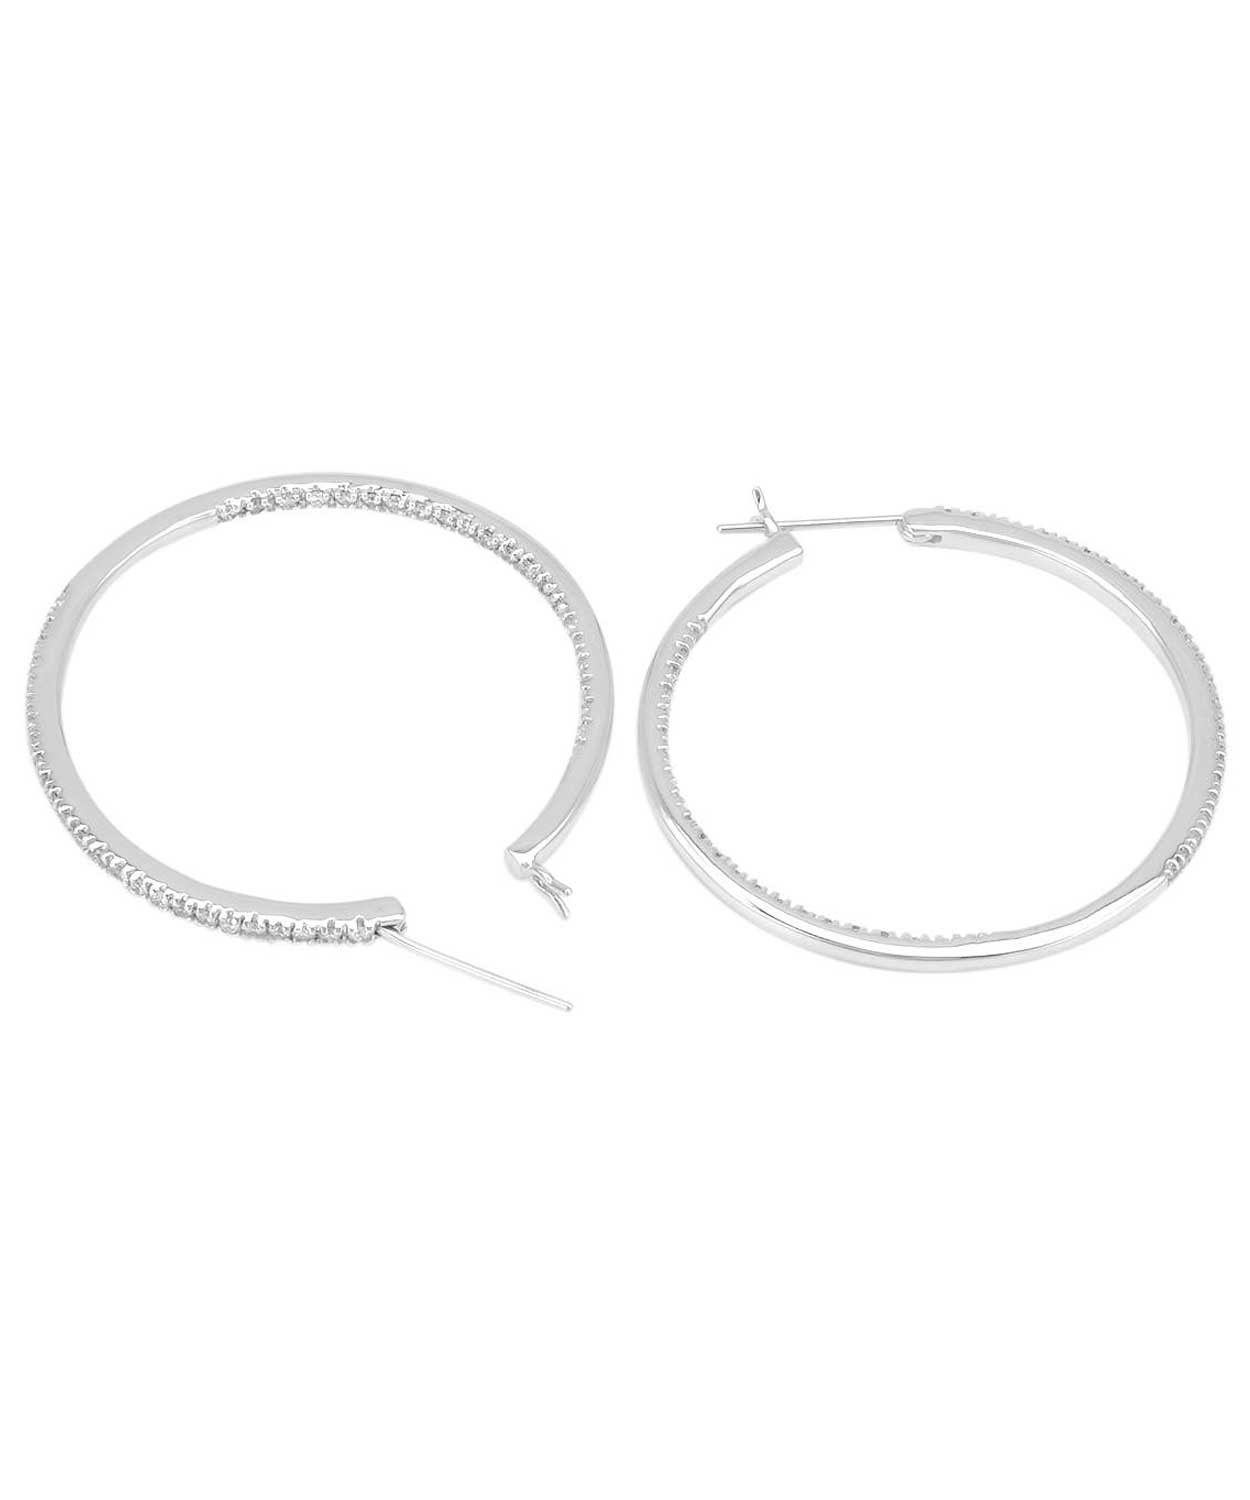 1.00 ctw Diamonds 14k White Gold Classic Inside-Out Hoop Earrings View 2